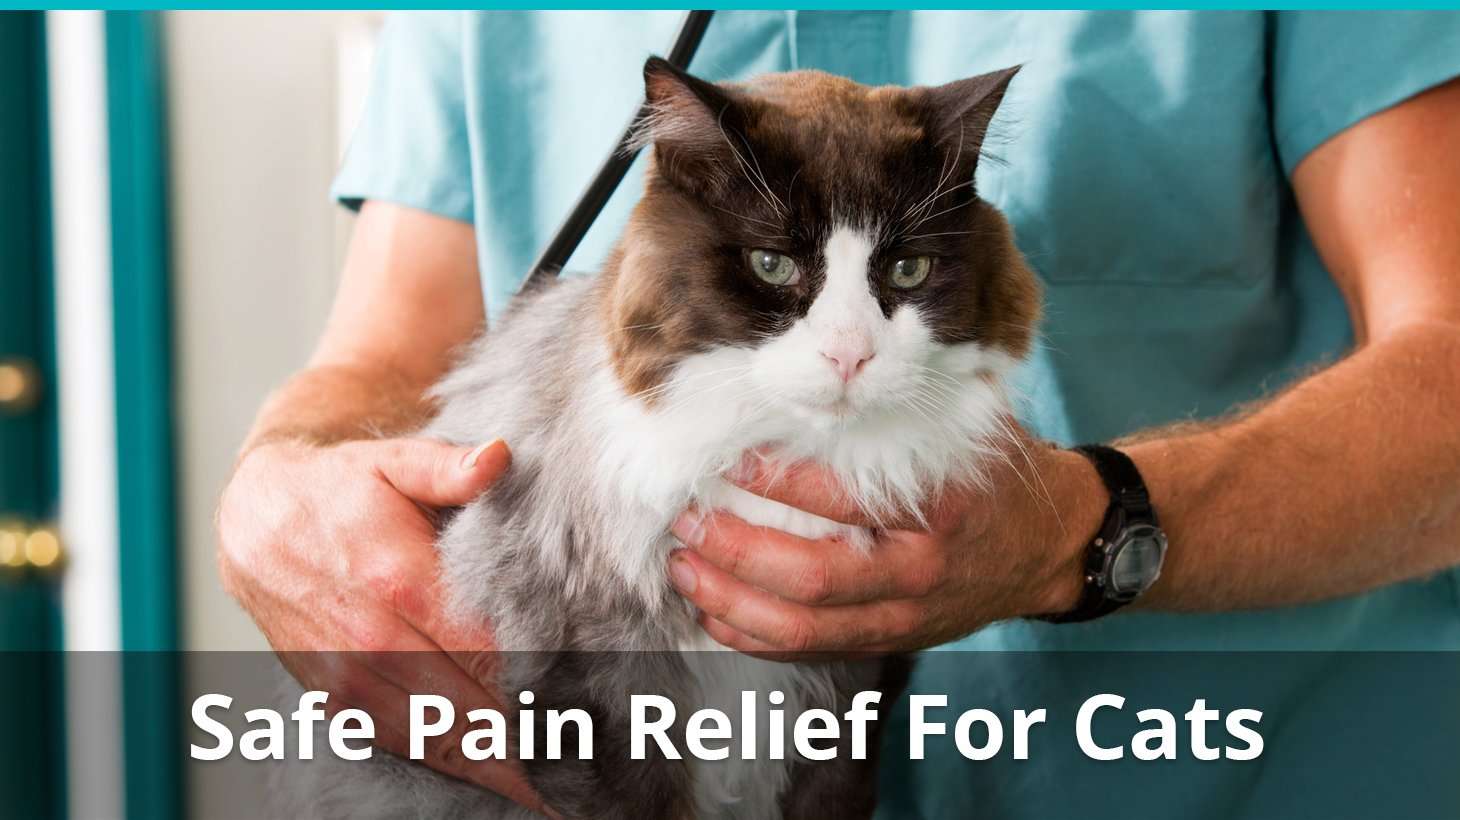 Safe Pain Relief For Cats: What Can You Give A Cat For Pain At Home?